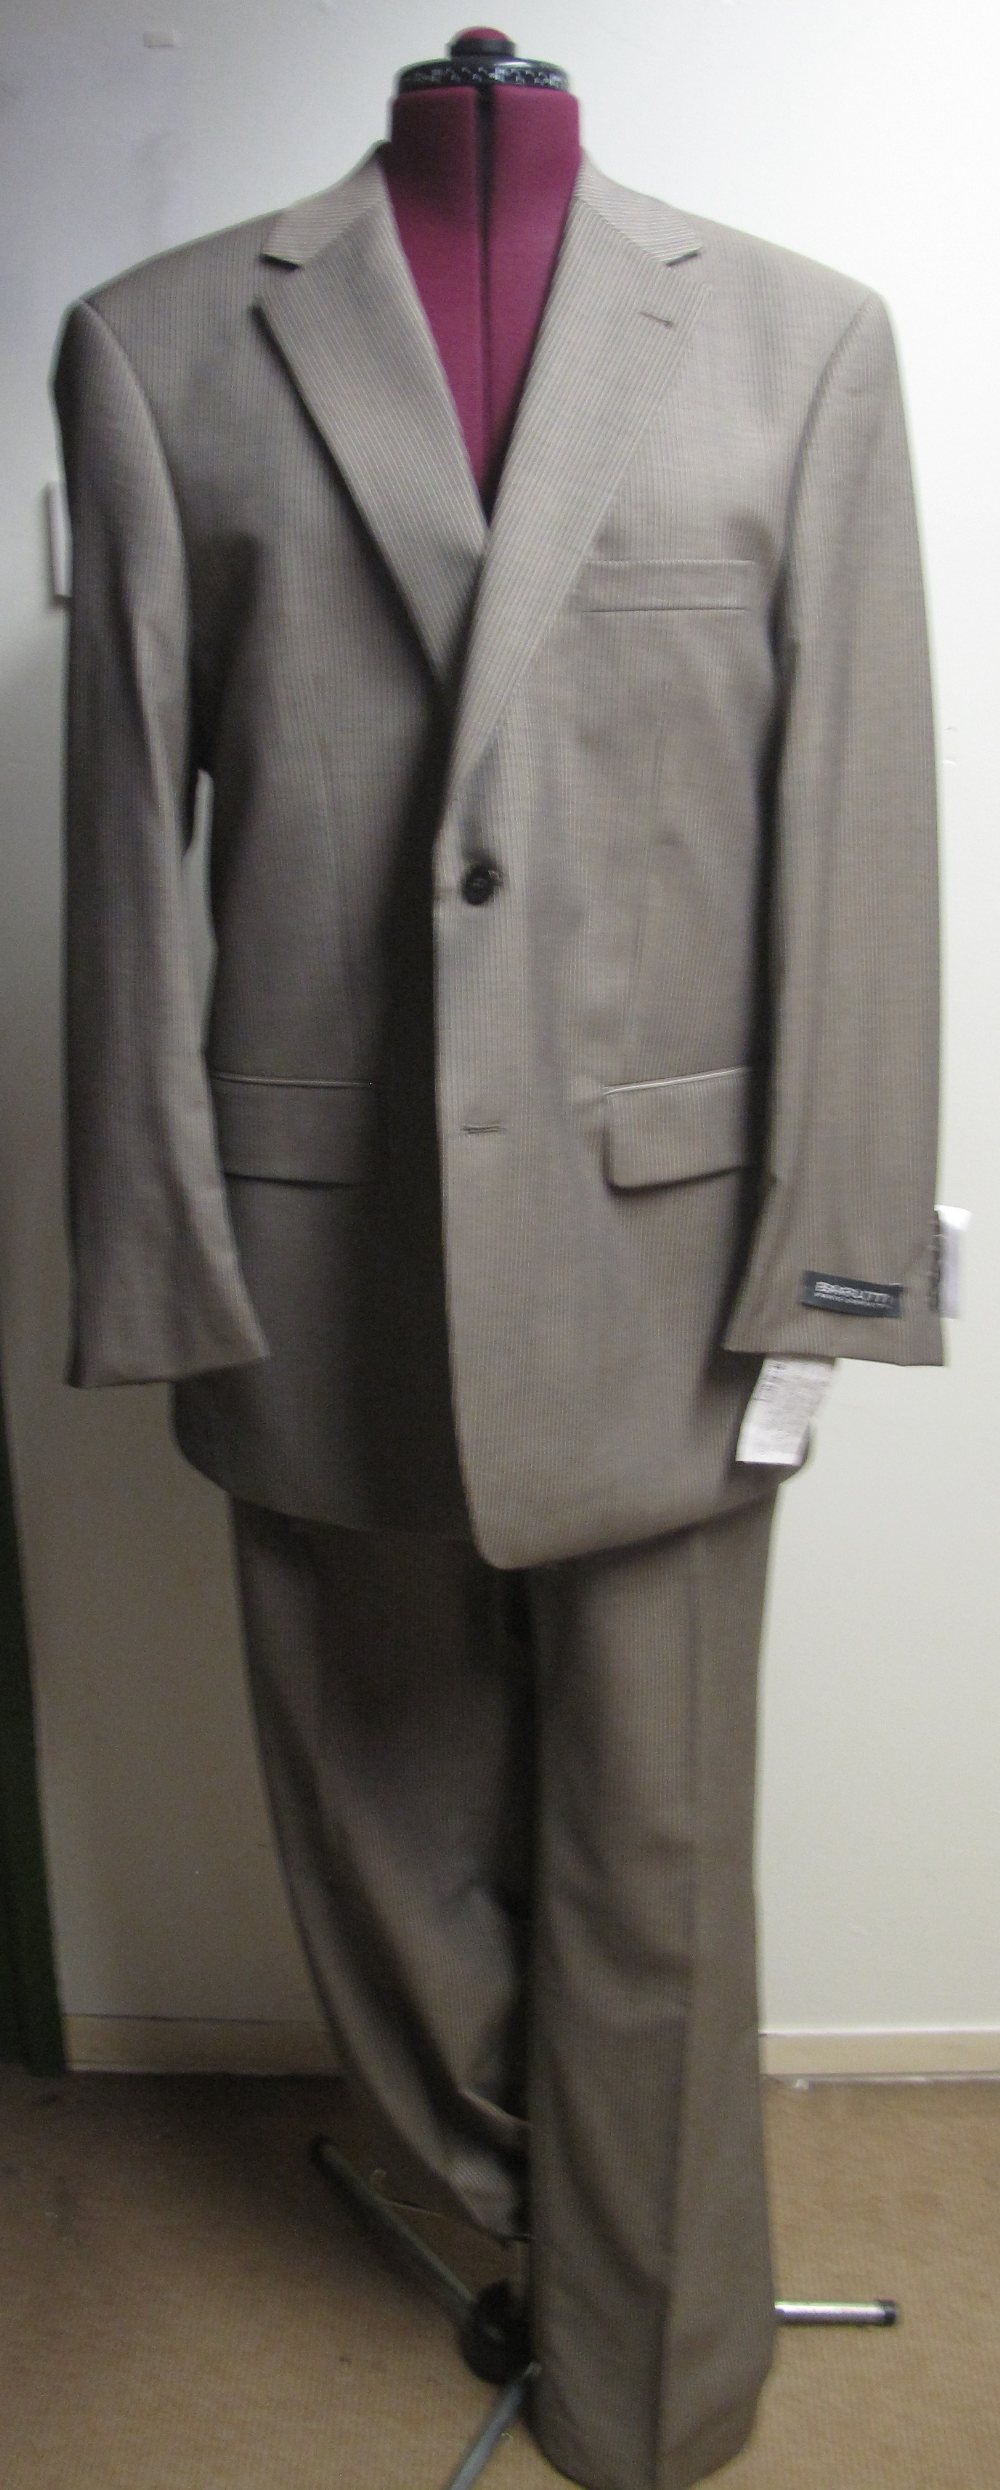 Six designer fine wool men's suits to include; a grey striped suit by Hugo Boss, - Image 4 of 9